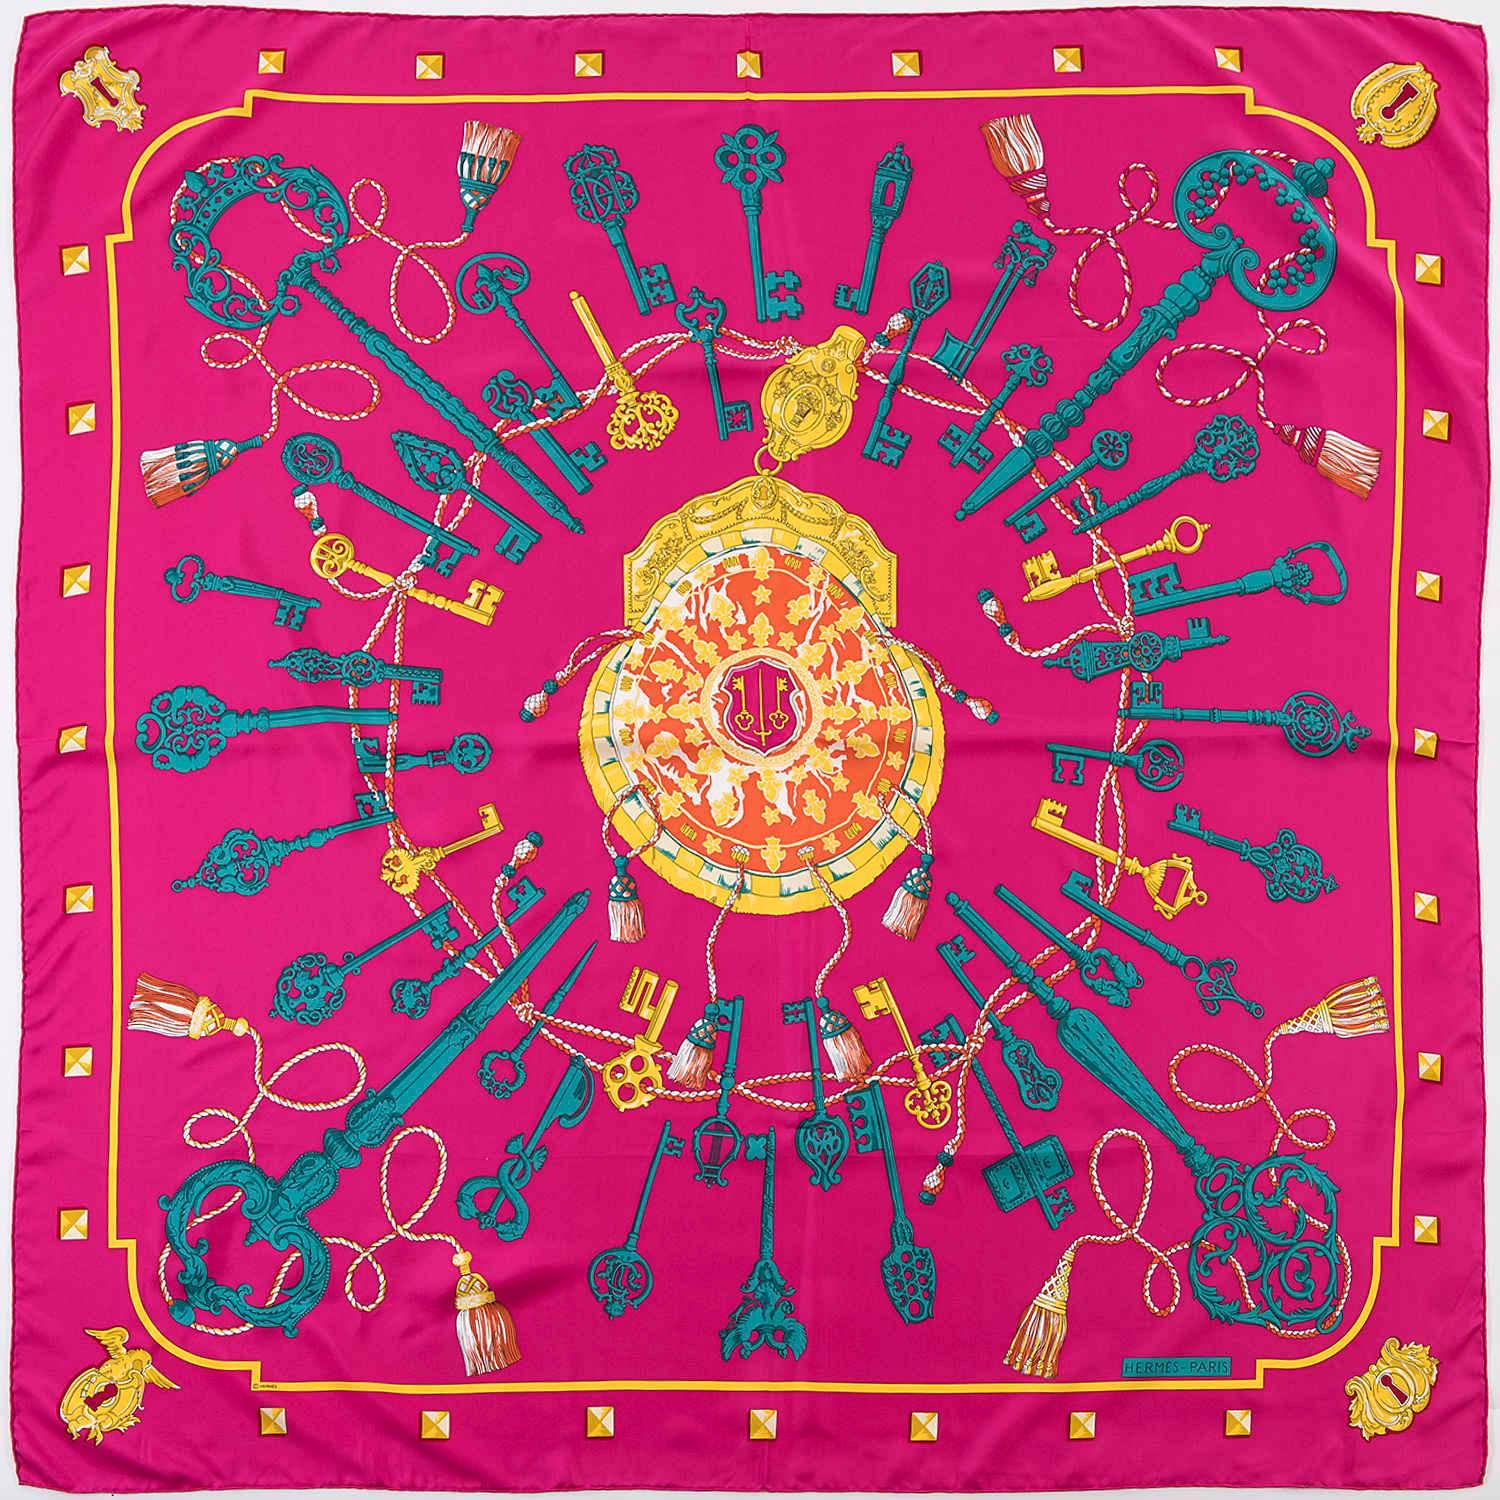 An absolutely stunning silk Shawl by Hermes - 'Les Clefs' by one of Hermes favourite designers, Caty Latham is finished with sumptous rich colours - yellow, orange, emerald green, white on a fuchsia ground and make this a stand out piece. In